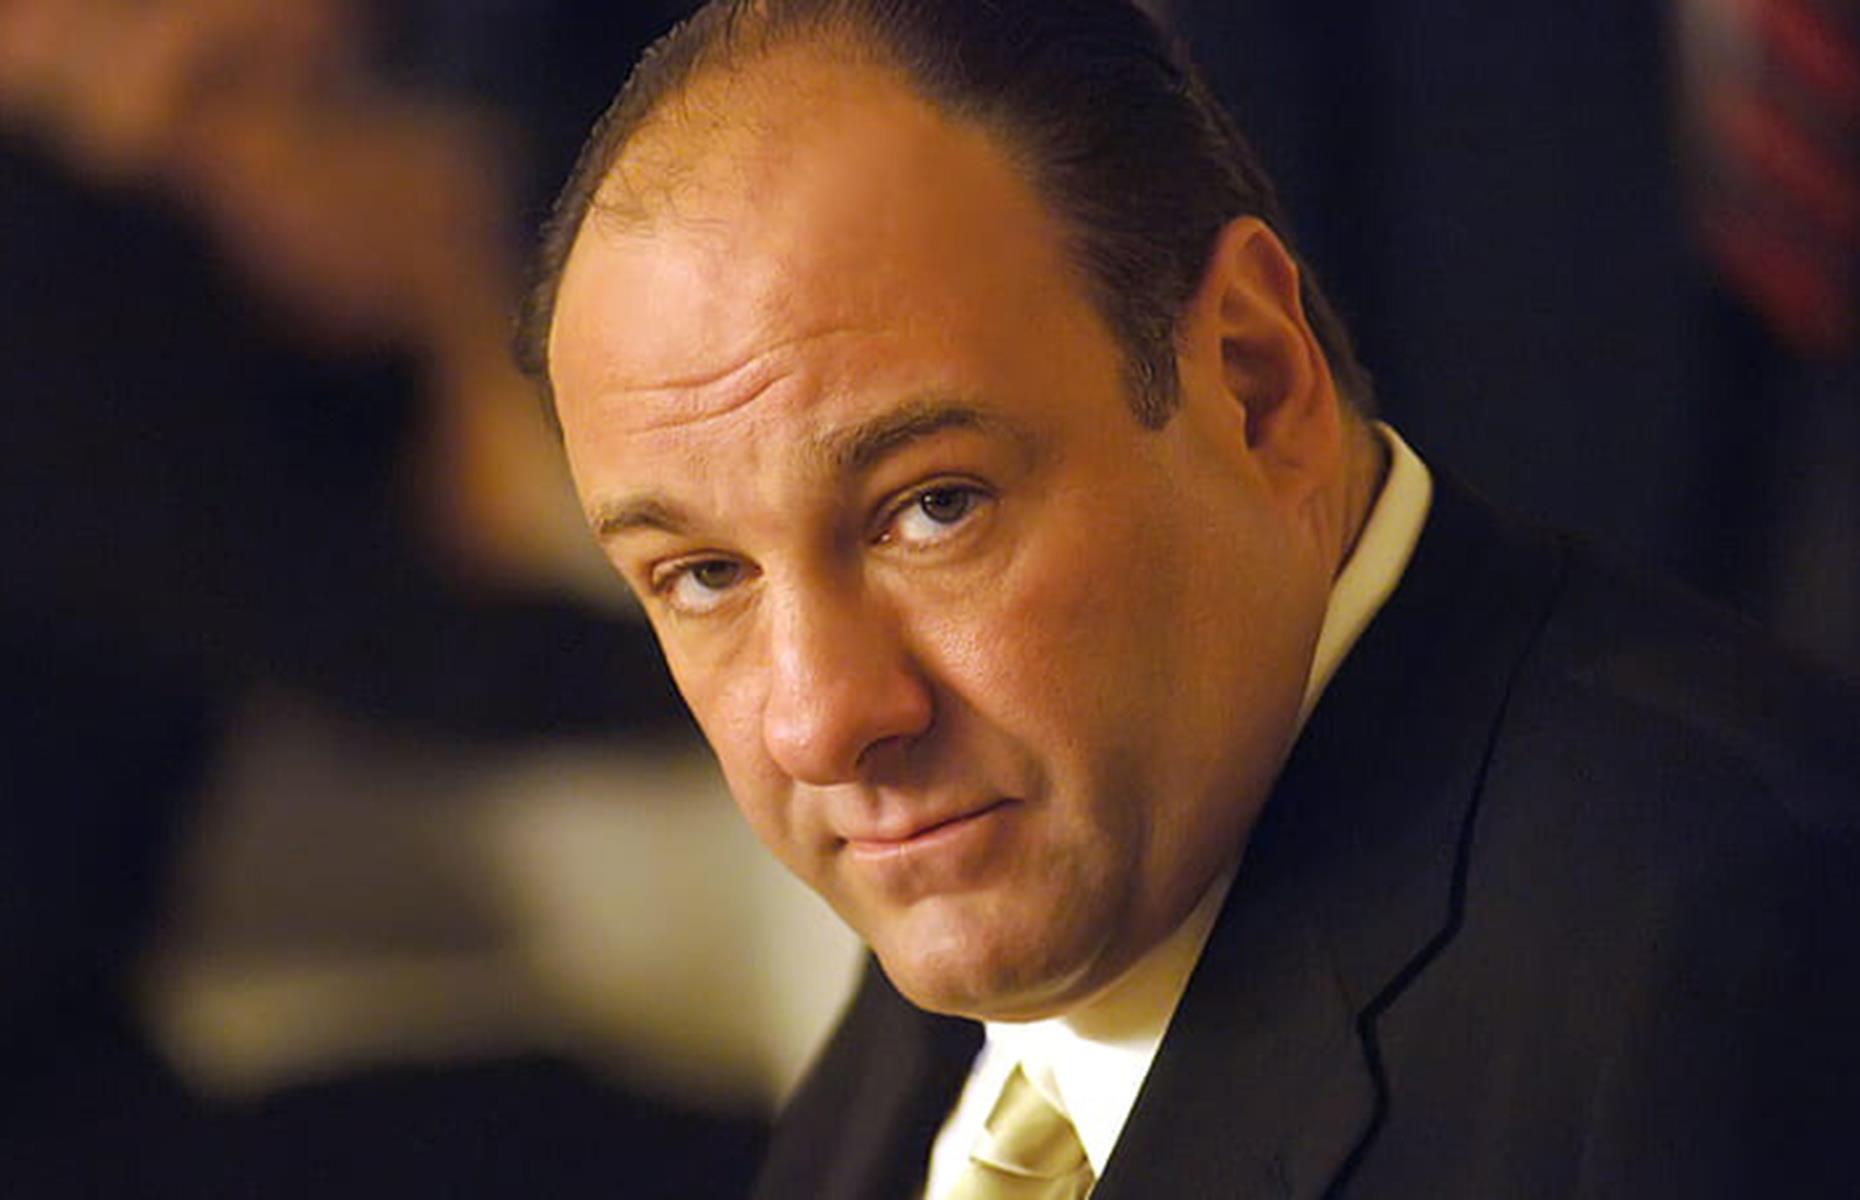 <p>James Gandolfini played Tony Soprano, the head of the DiMeo crime family. </p>  <p>His role as the complicated mafia boss earned Gandolfini three Emmy awards for Outstanding Lead Actor in a Drama Series, as well as a Golden Globe.</p>  <p>The actor made his screen debut in the 1987 comedy<em> Shock! Shock! Shock!</em>, and had also appeared in money-making movies such as <em>True Romance, </em><em>Terminal Velocity</em>, and <em>Crimson Tide</em>. </p>